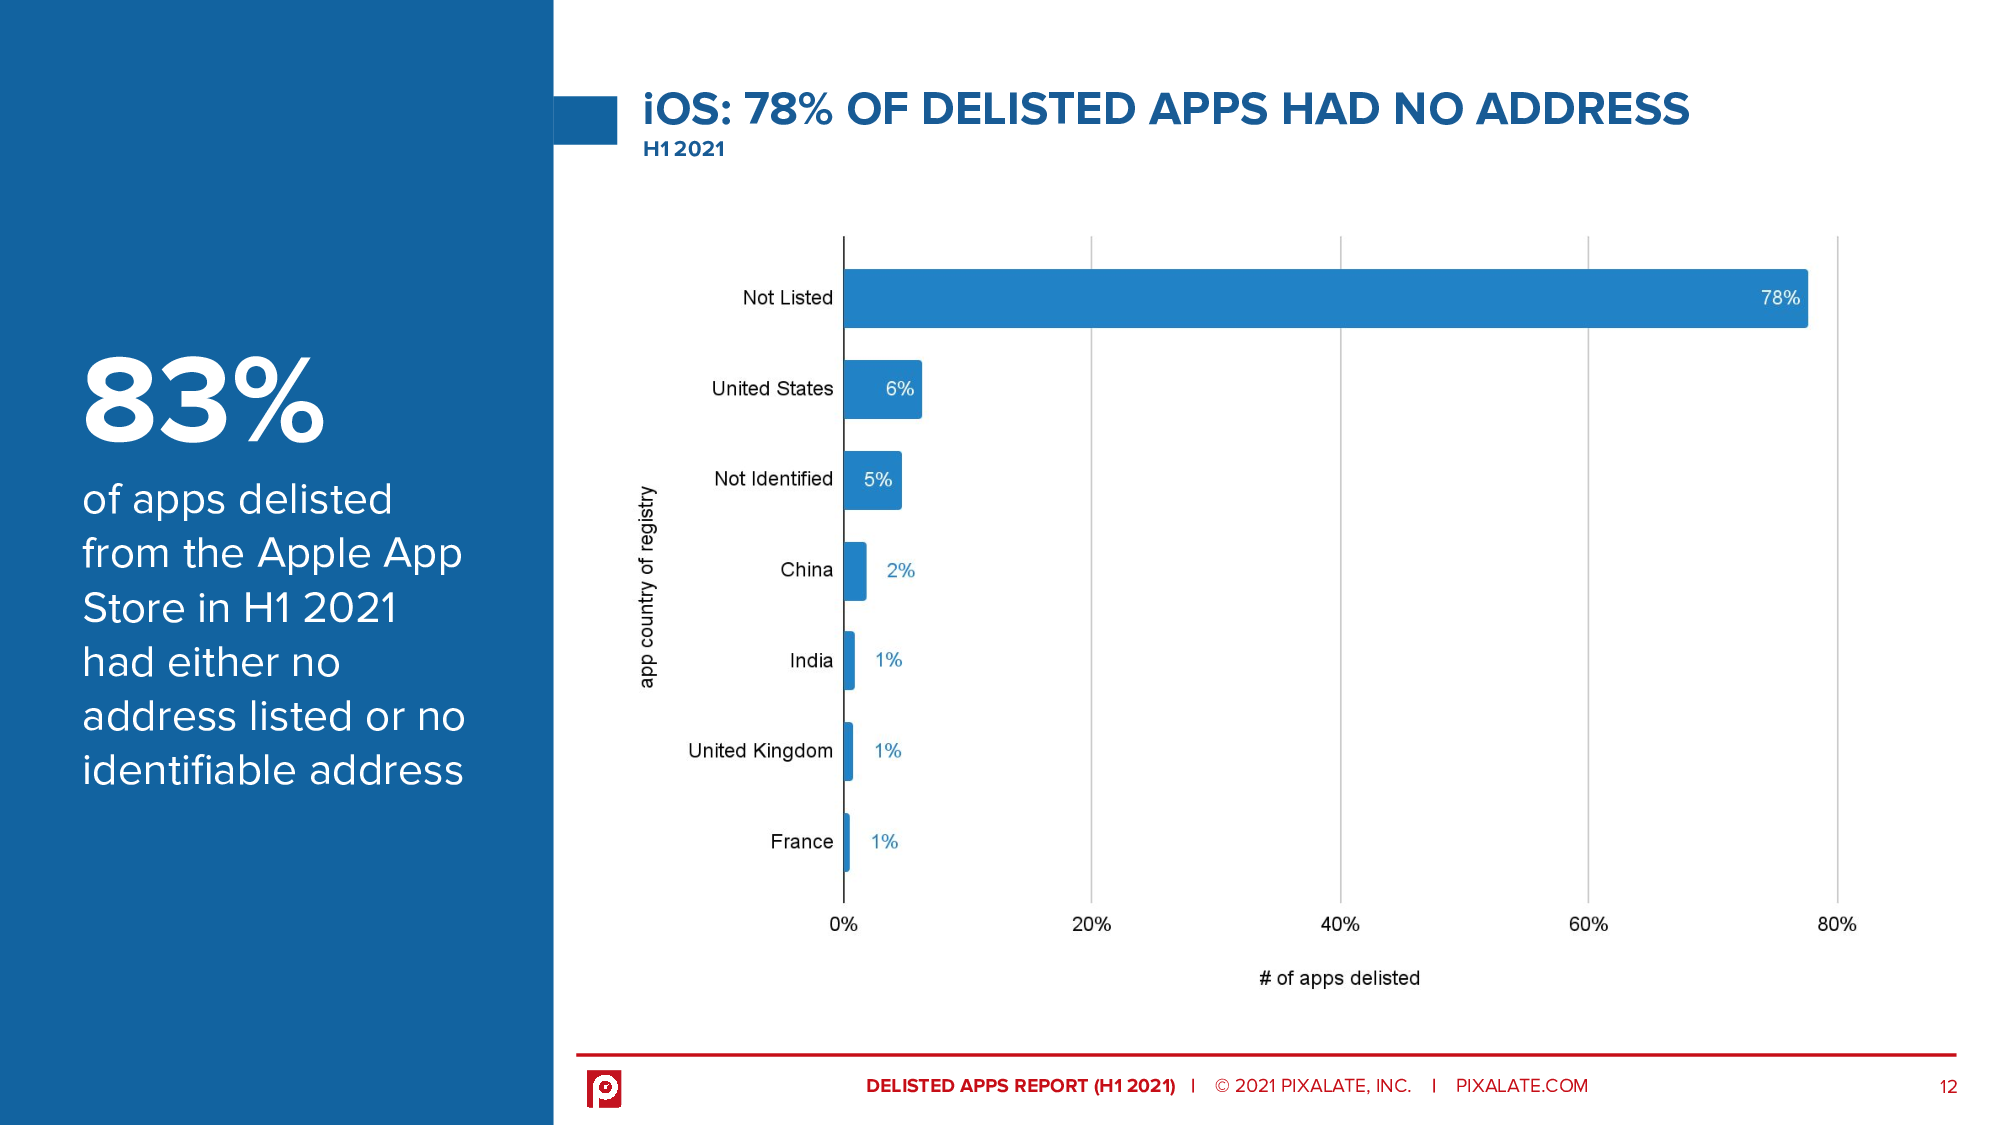 83% of apps delisted from the Apple App Store in H1 2021 had either no address listed or no identifiable address